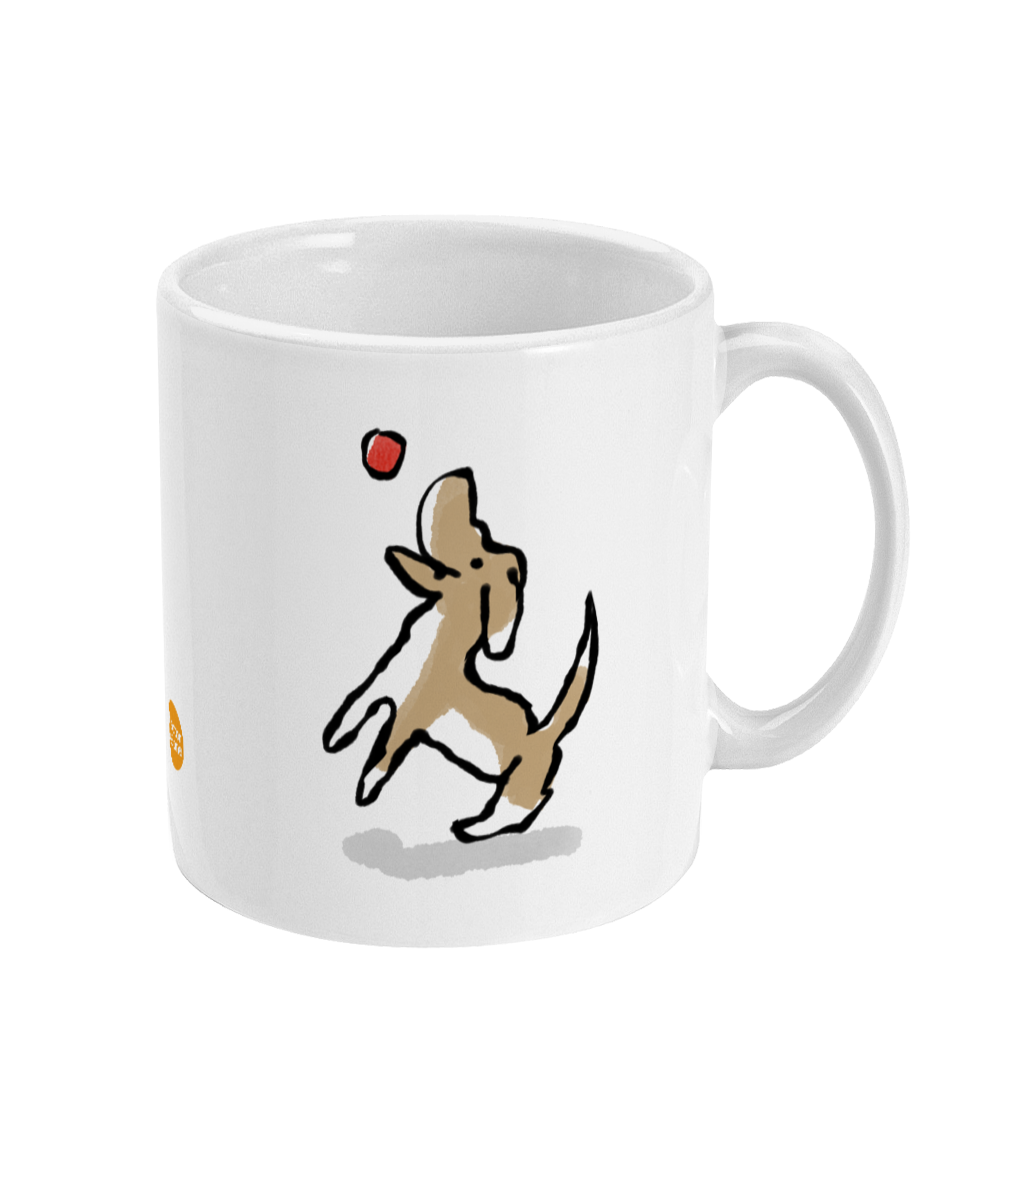 Jumping Dog design coffee mug by Hector and Bone Right View